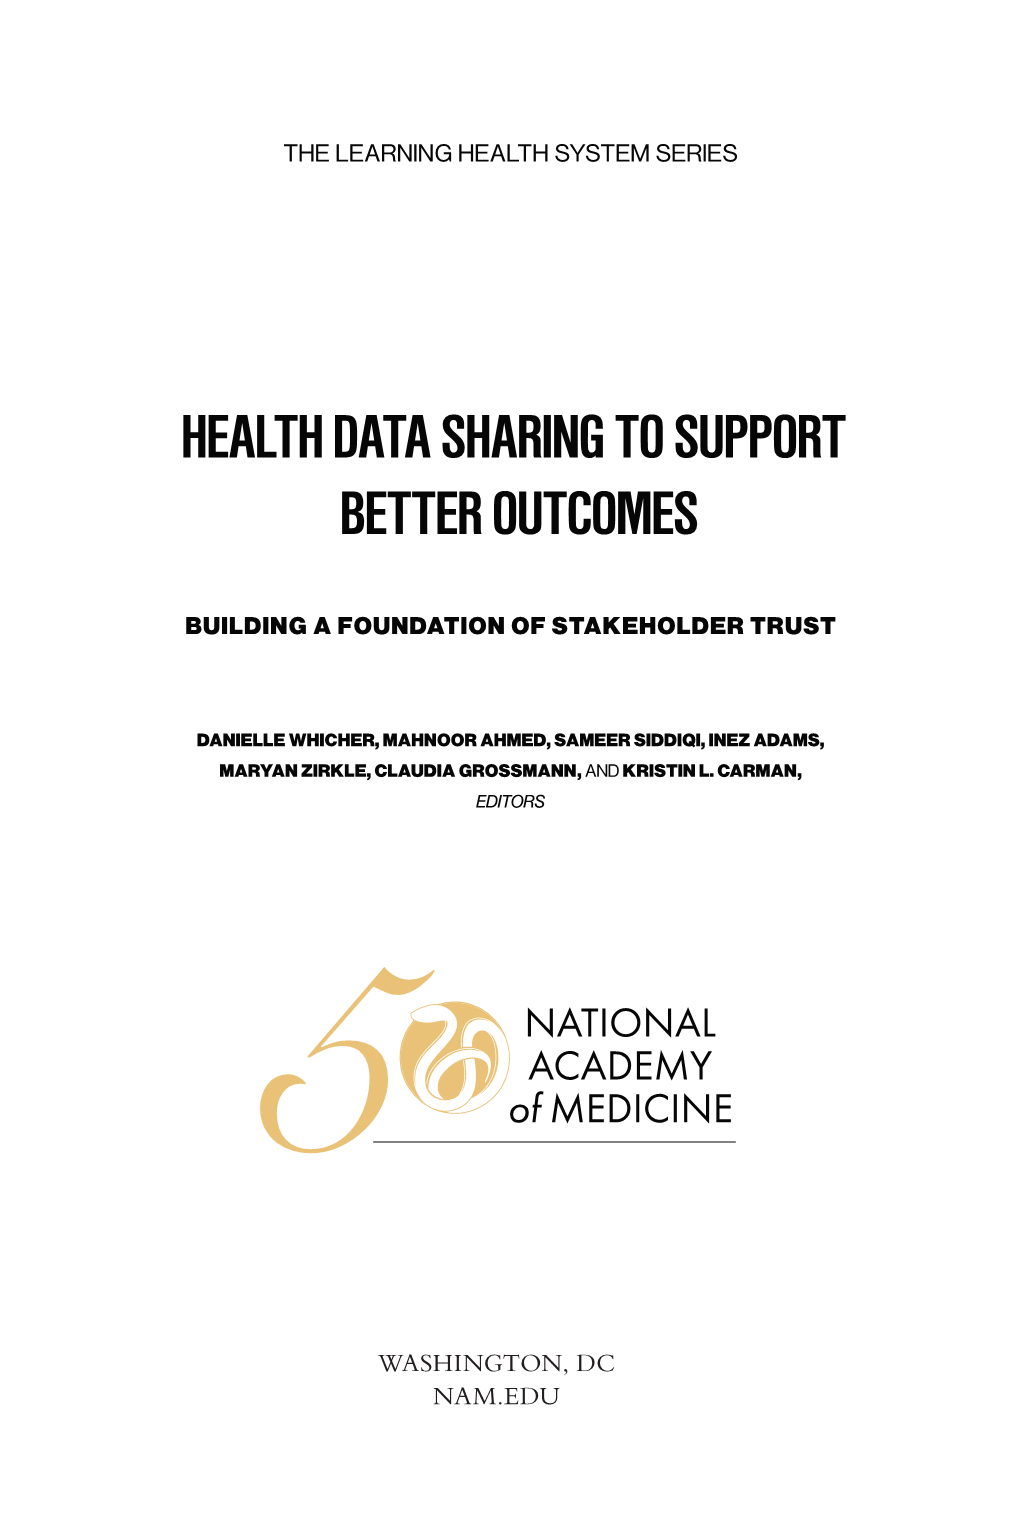 Health Data Sharing to Support Better Outcomes